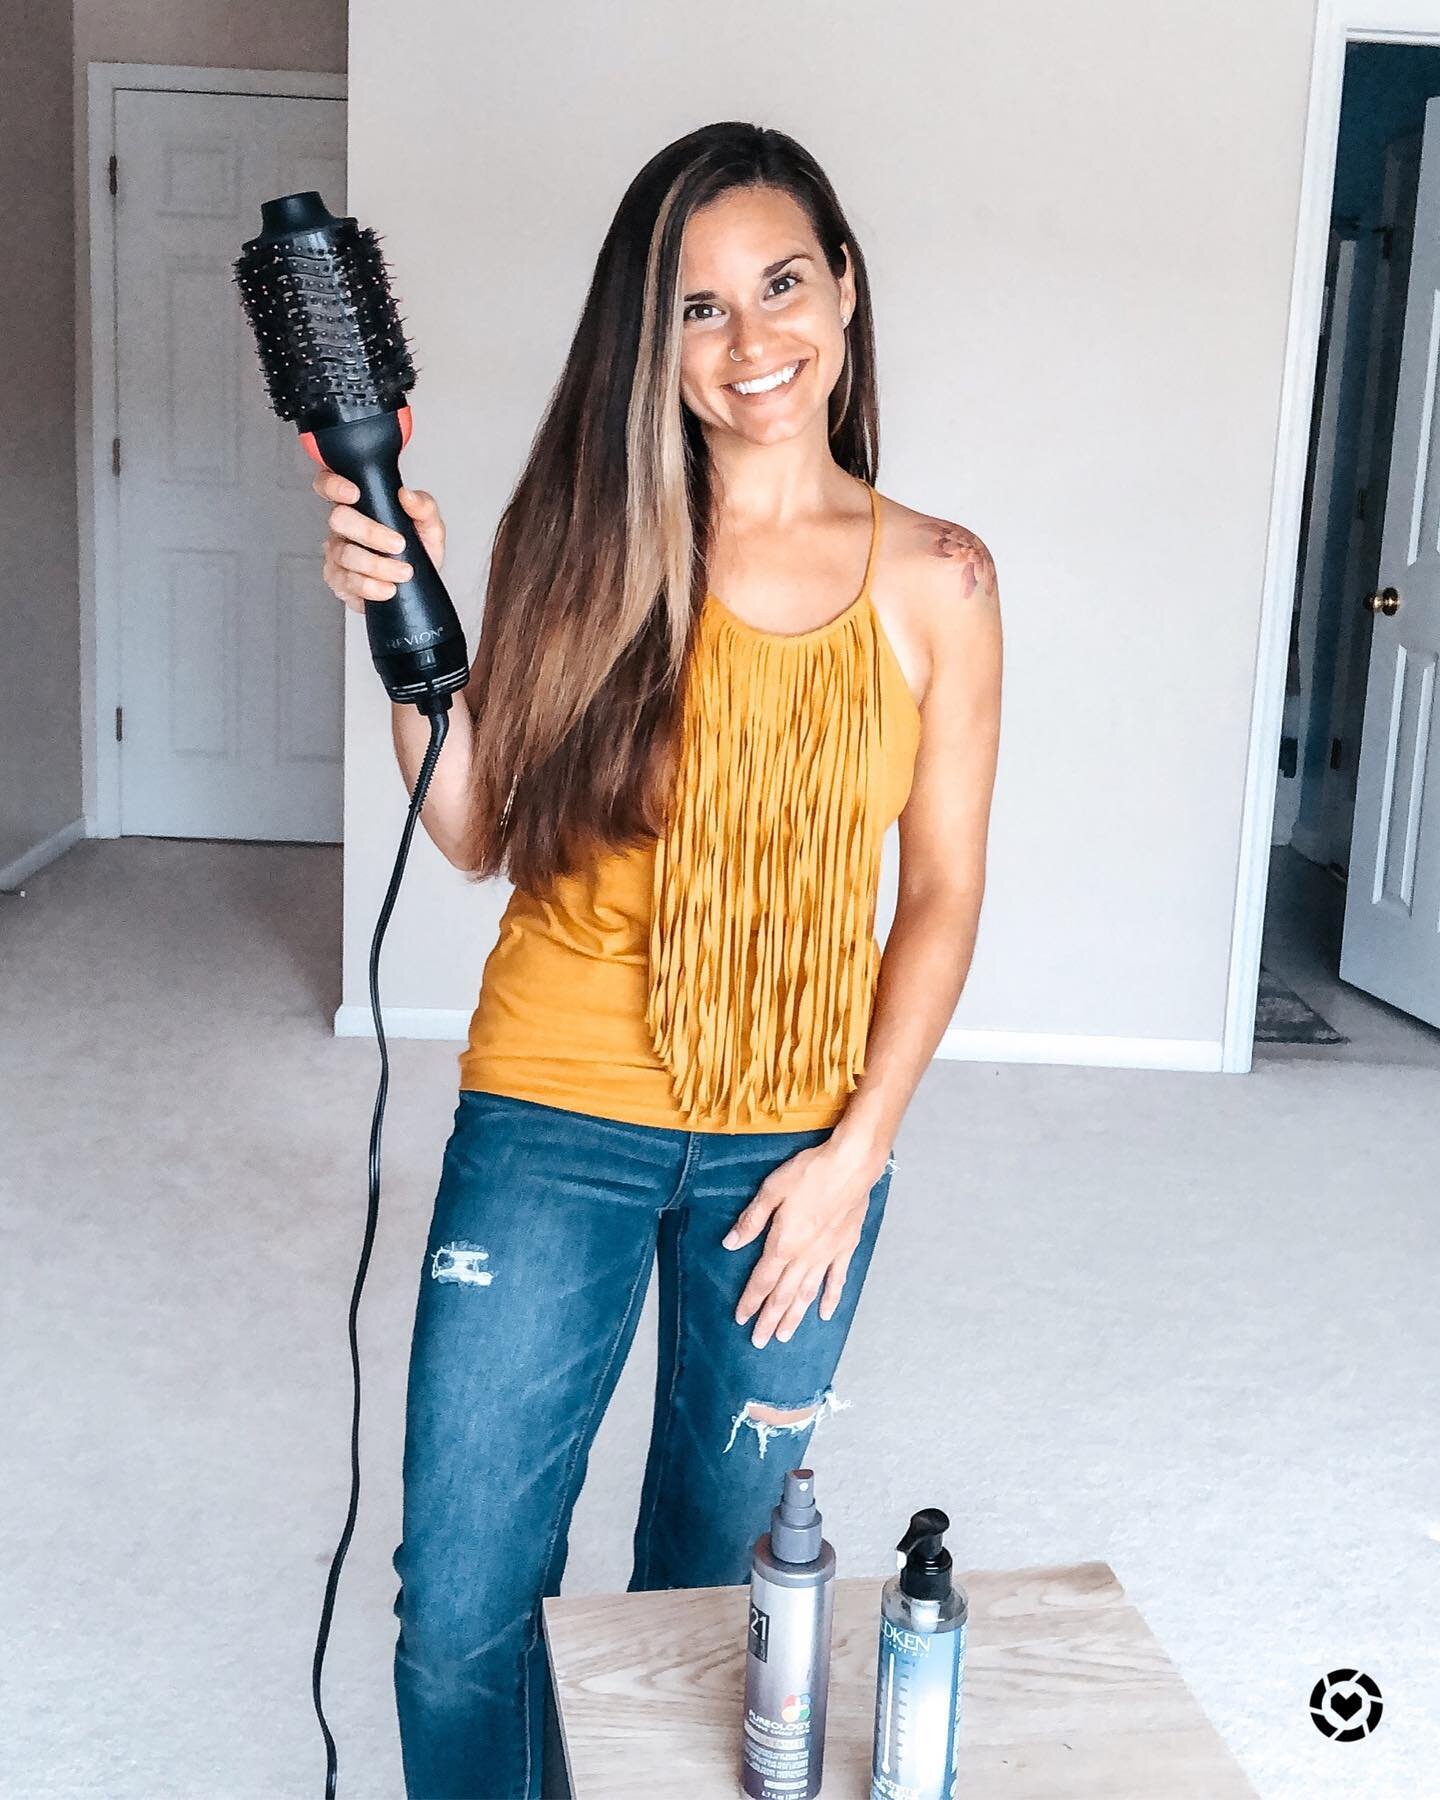 Y&rsquo;all have heard me obsessing over this blow dryer for over 2 years! Well guess what? The love affair isn&rsquo;t over! Revlons Volumizer is still my #1 hair tool for 2020!  You can instantly shop my looks by following me on the LIKEtoKNOW.it s